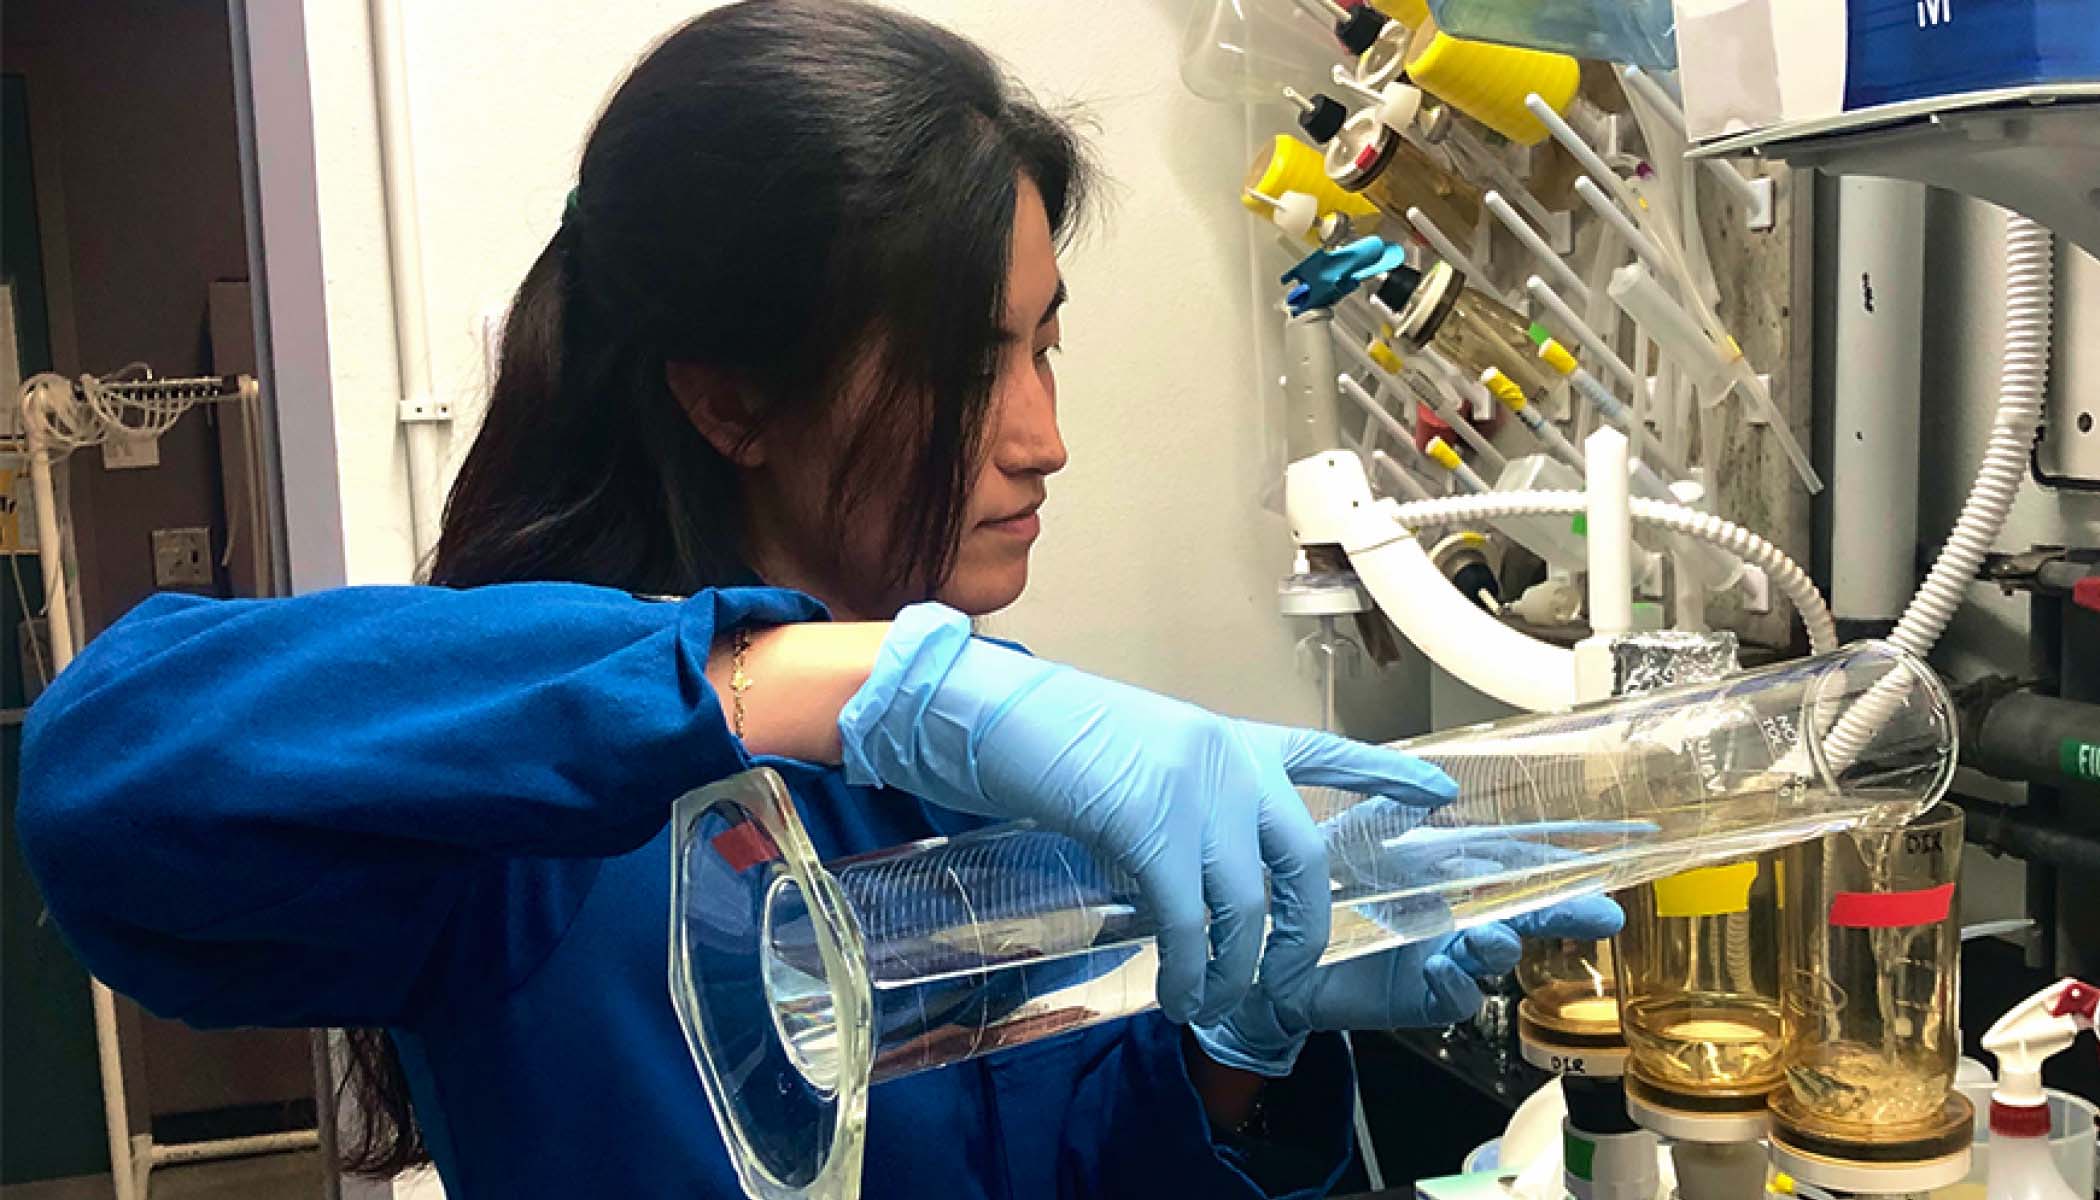 Lab specialist Sylvia Kim wearing a blue lab coat and gloves pours a liquid from a glass beaker.